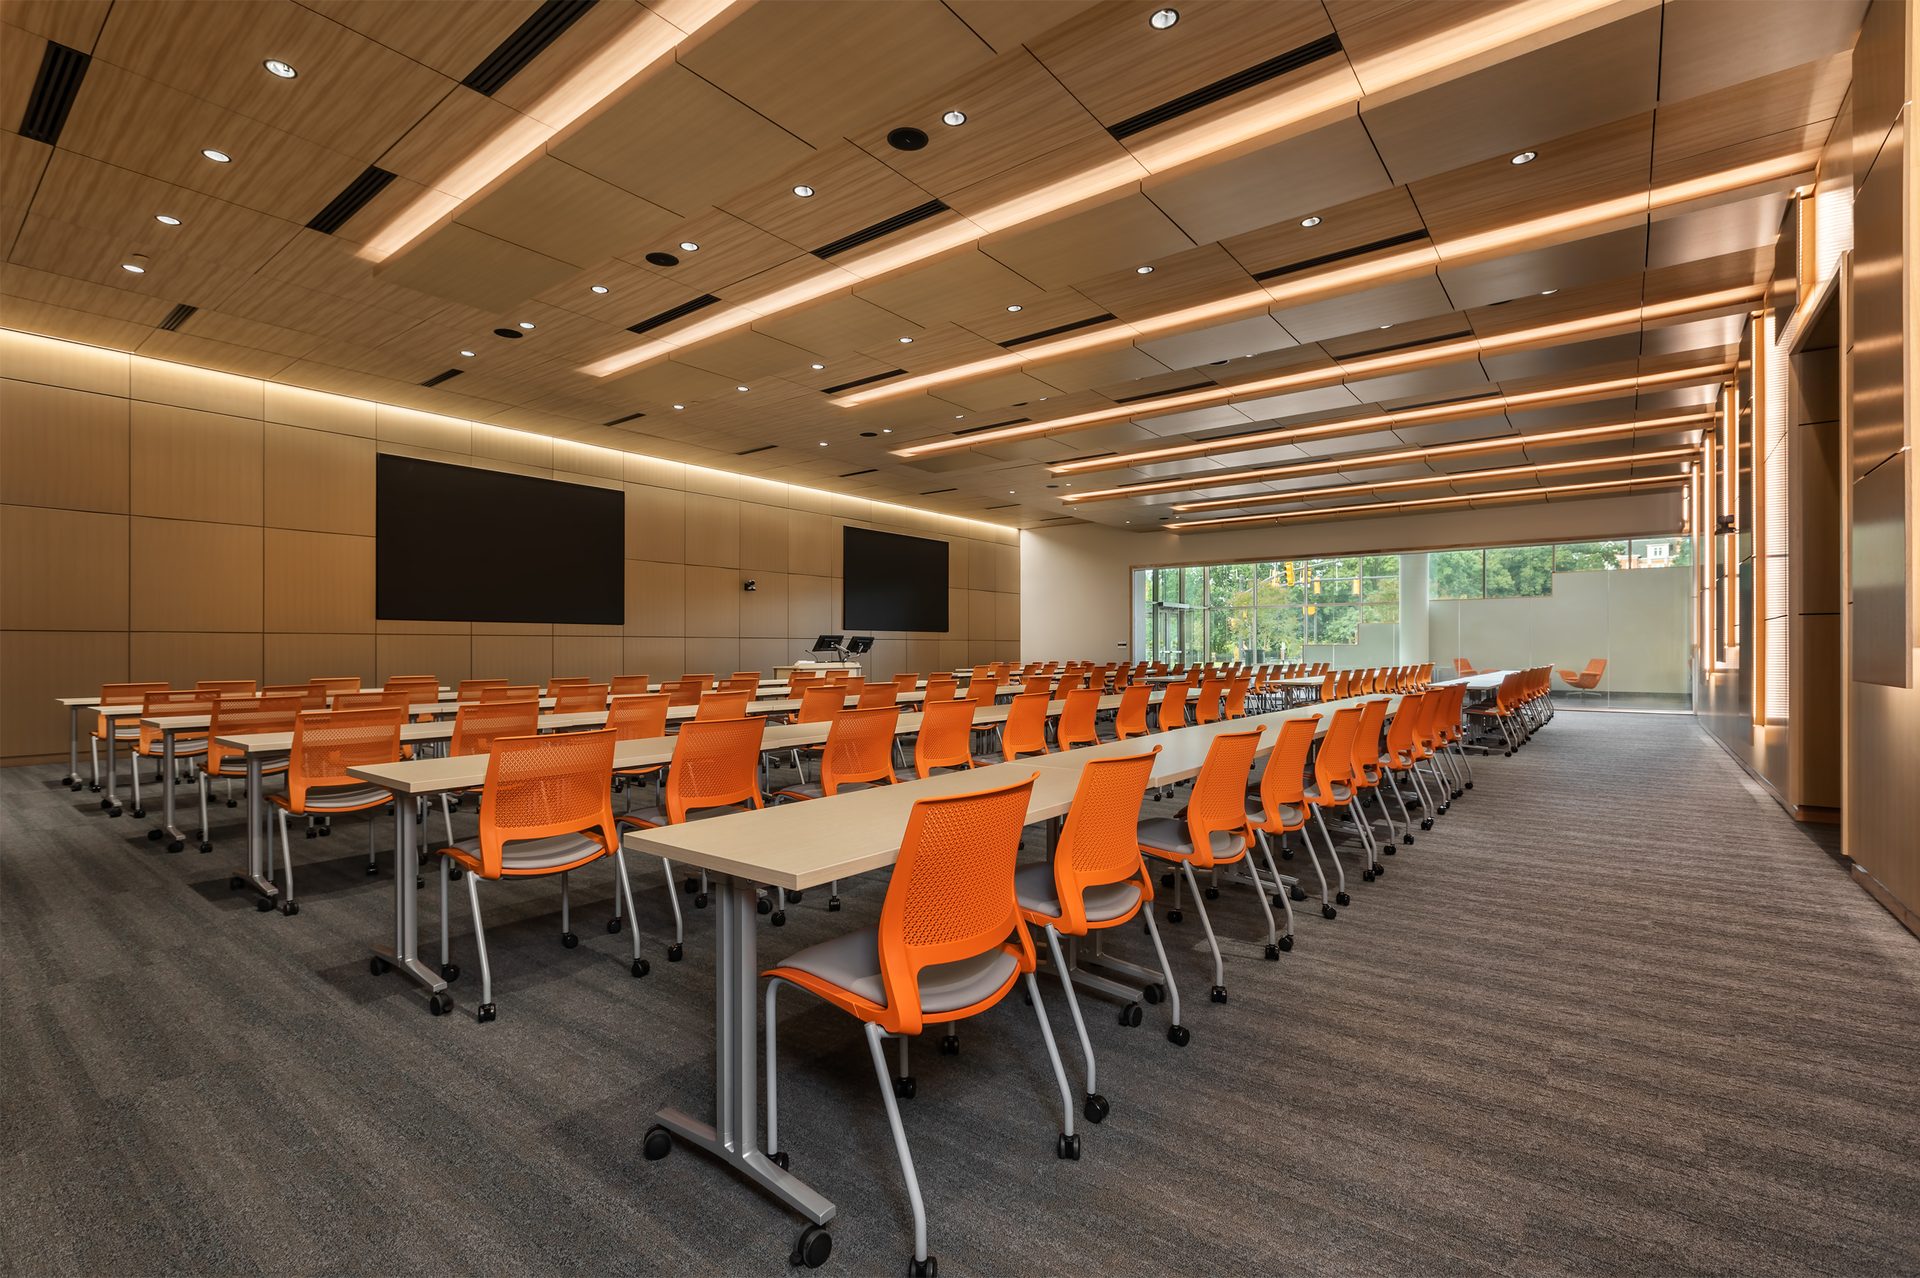 Bright interior of a conference room with a light wood finish ceiling system.